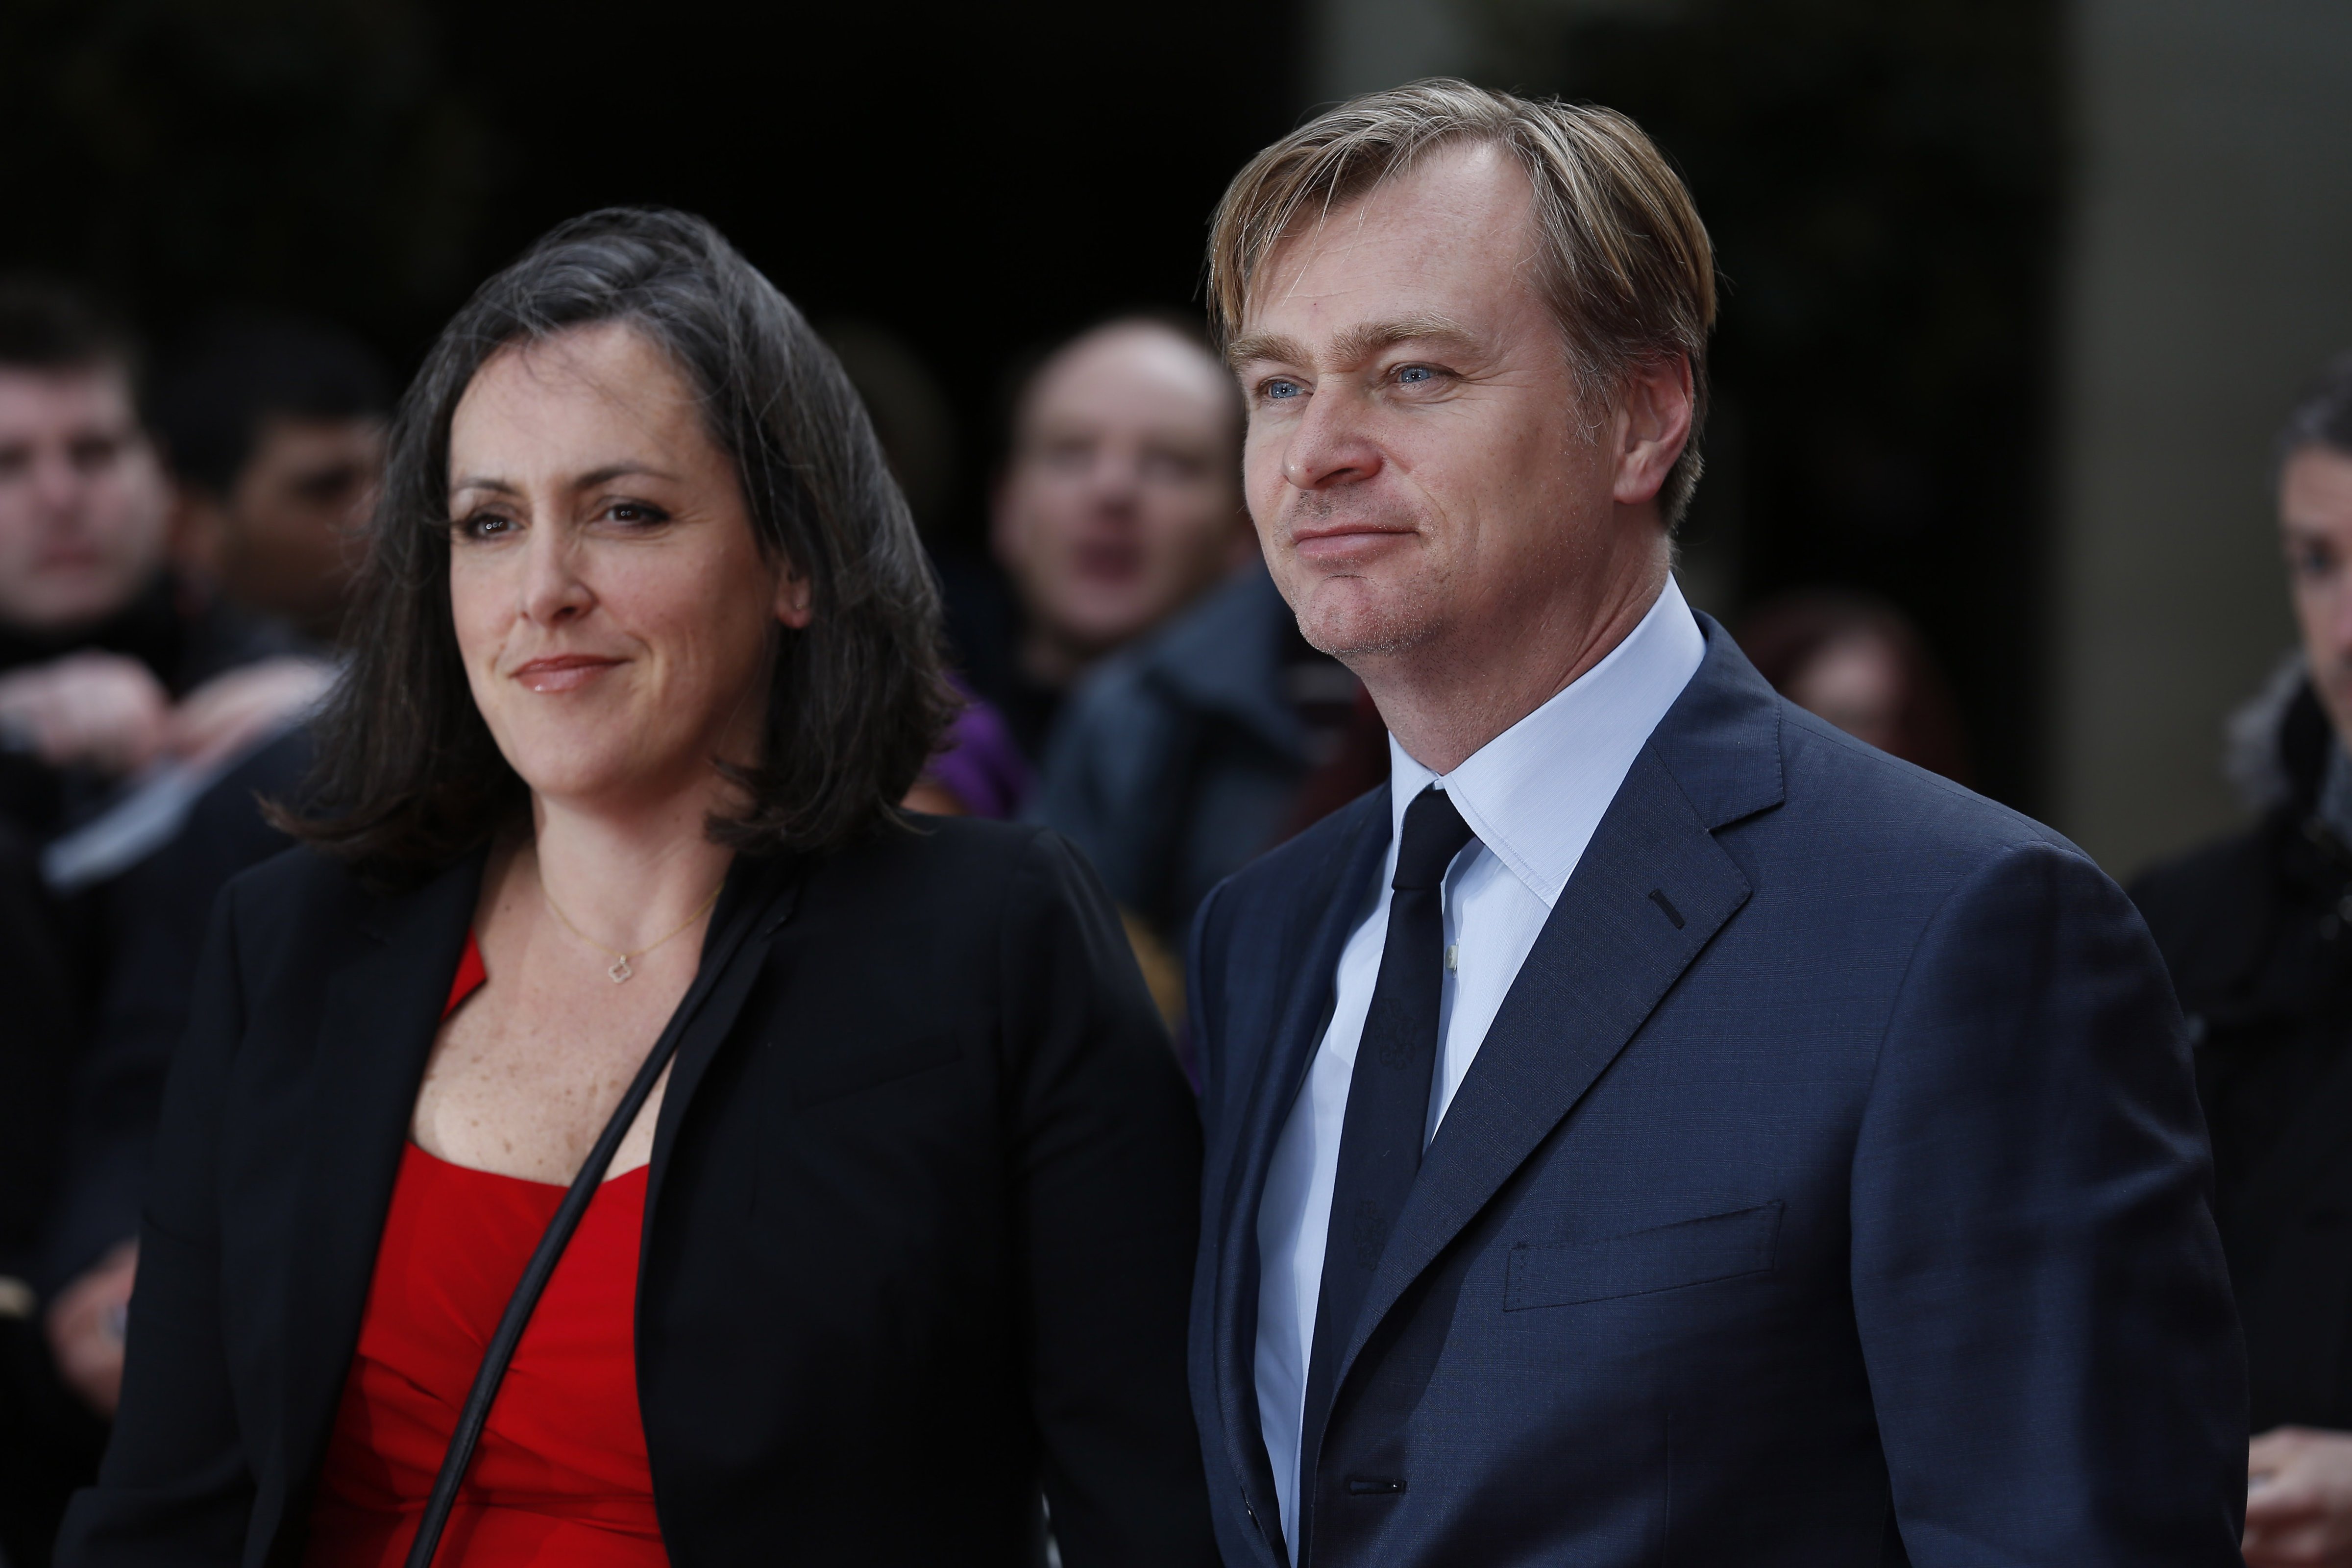 British director Christopher Nolan (R) and his wife, British film producer Emma Thomas pose for photographers as they arrive for the 2015 Empire Awards in central London on Mar. 29, 2015. (Justin Tallis—AFP/Getty Images)